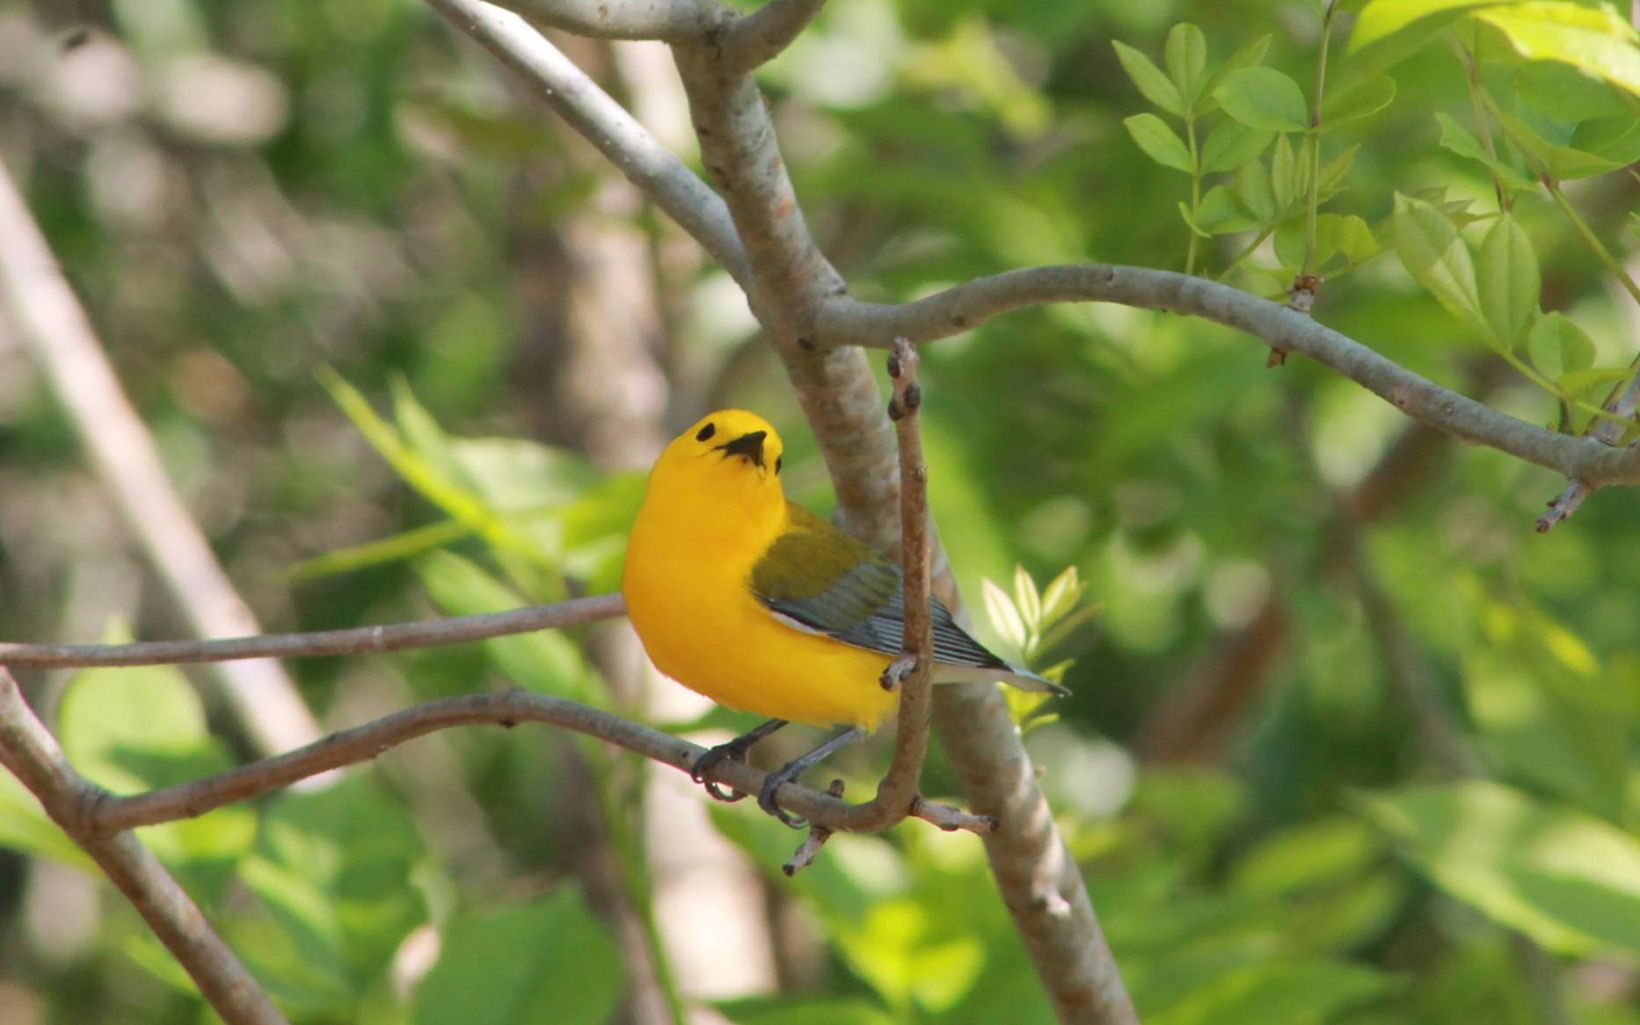 A small yellow songbird with black wings perches on a tree branch.